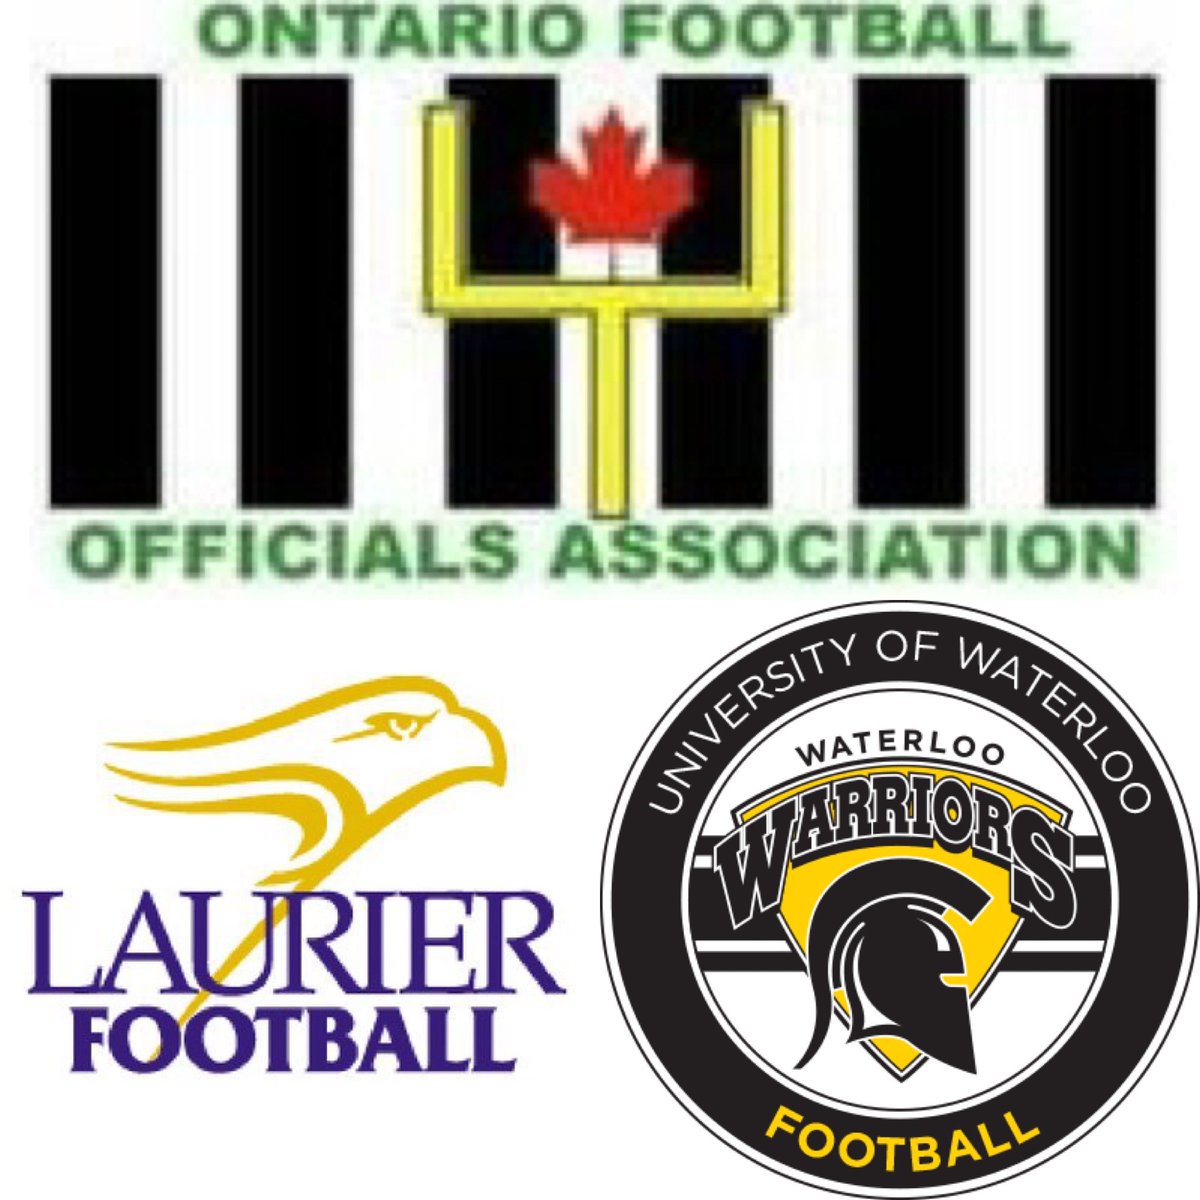 Together we grew the game! Thank you to Murray Drinkwalter & Ben Chapdelaine who spoke to 150 @LaurierFootball & @WlooFTB players this afternoon about a potential future in officiating. A friendly “Battle of Waterloo” meeting with great information, conversation, and questions.